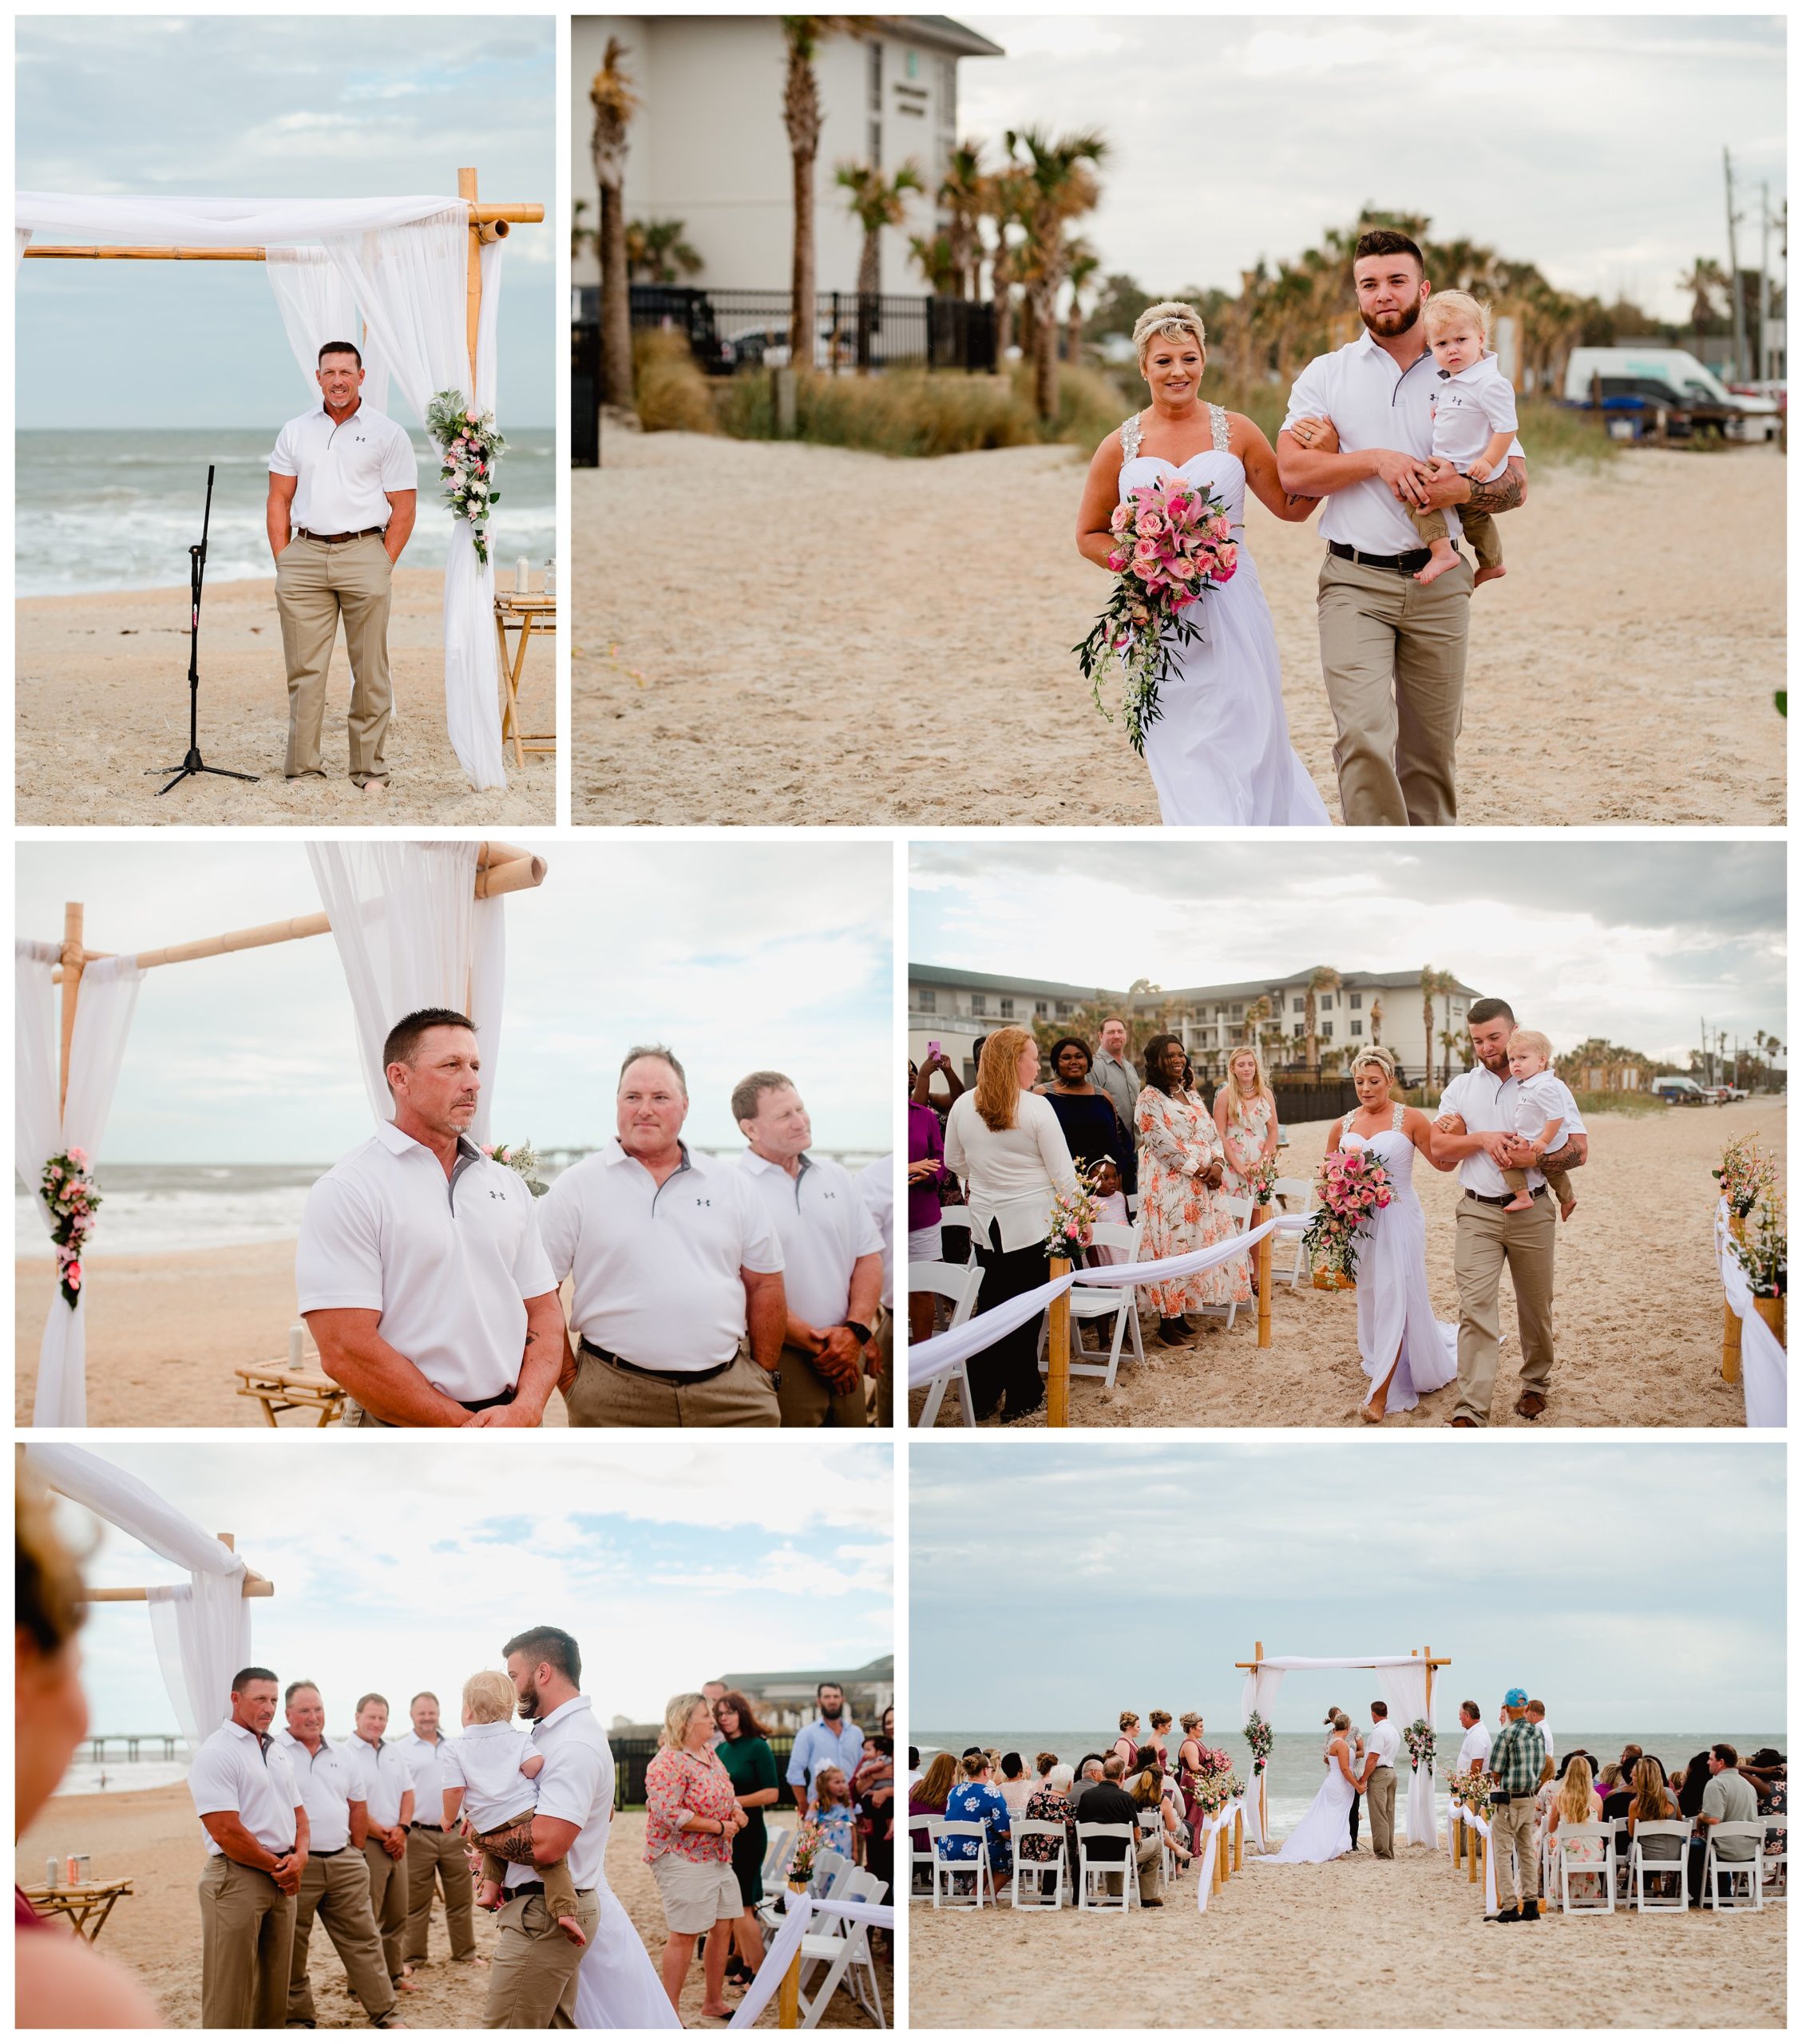 Intimate small beach ceremony moments captured by lifestyle wedding photographer in North Florida.